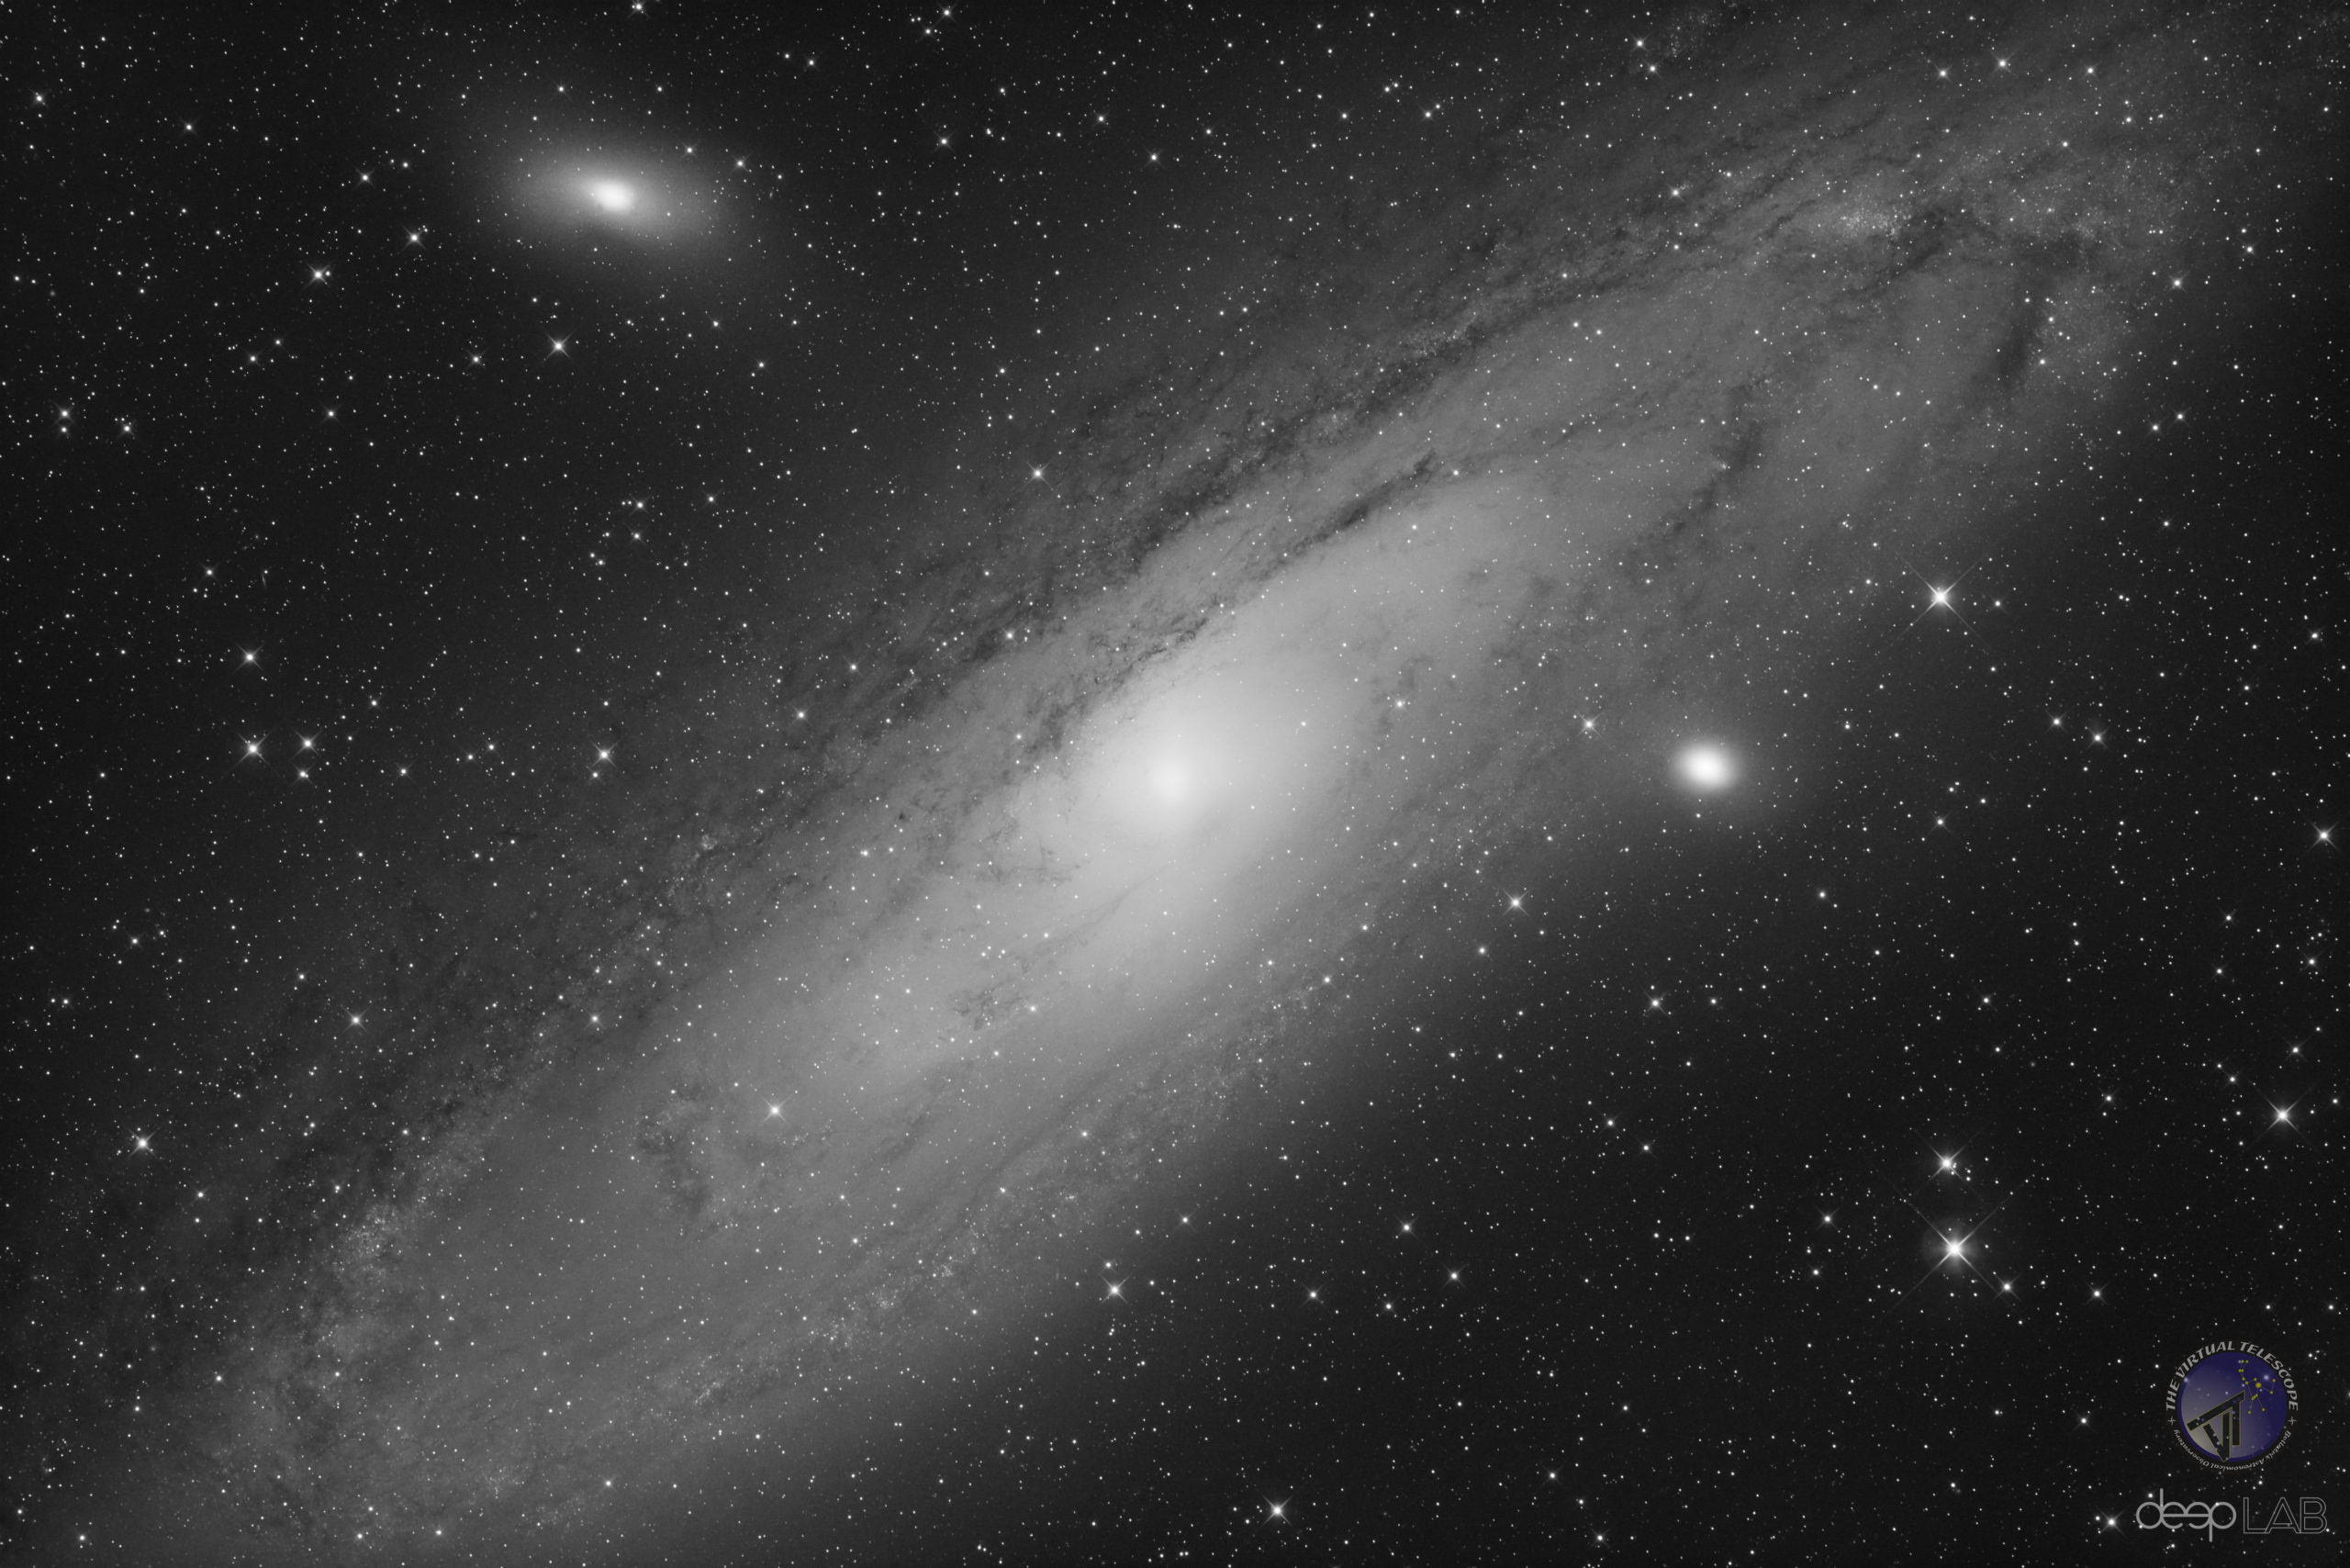 Messier 31, as from the imaging setup used for the survey.